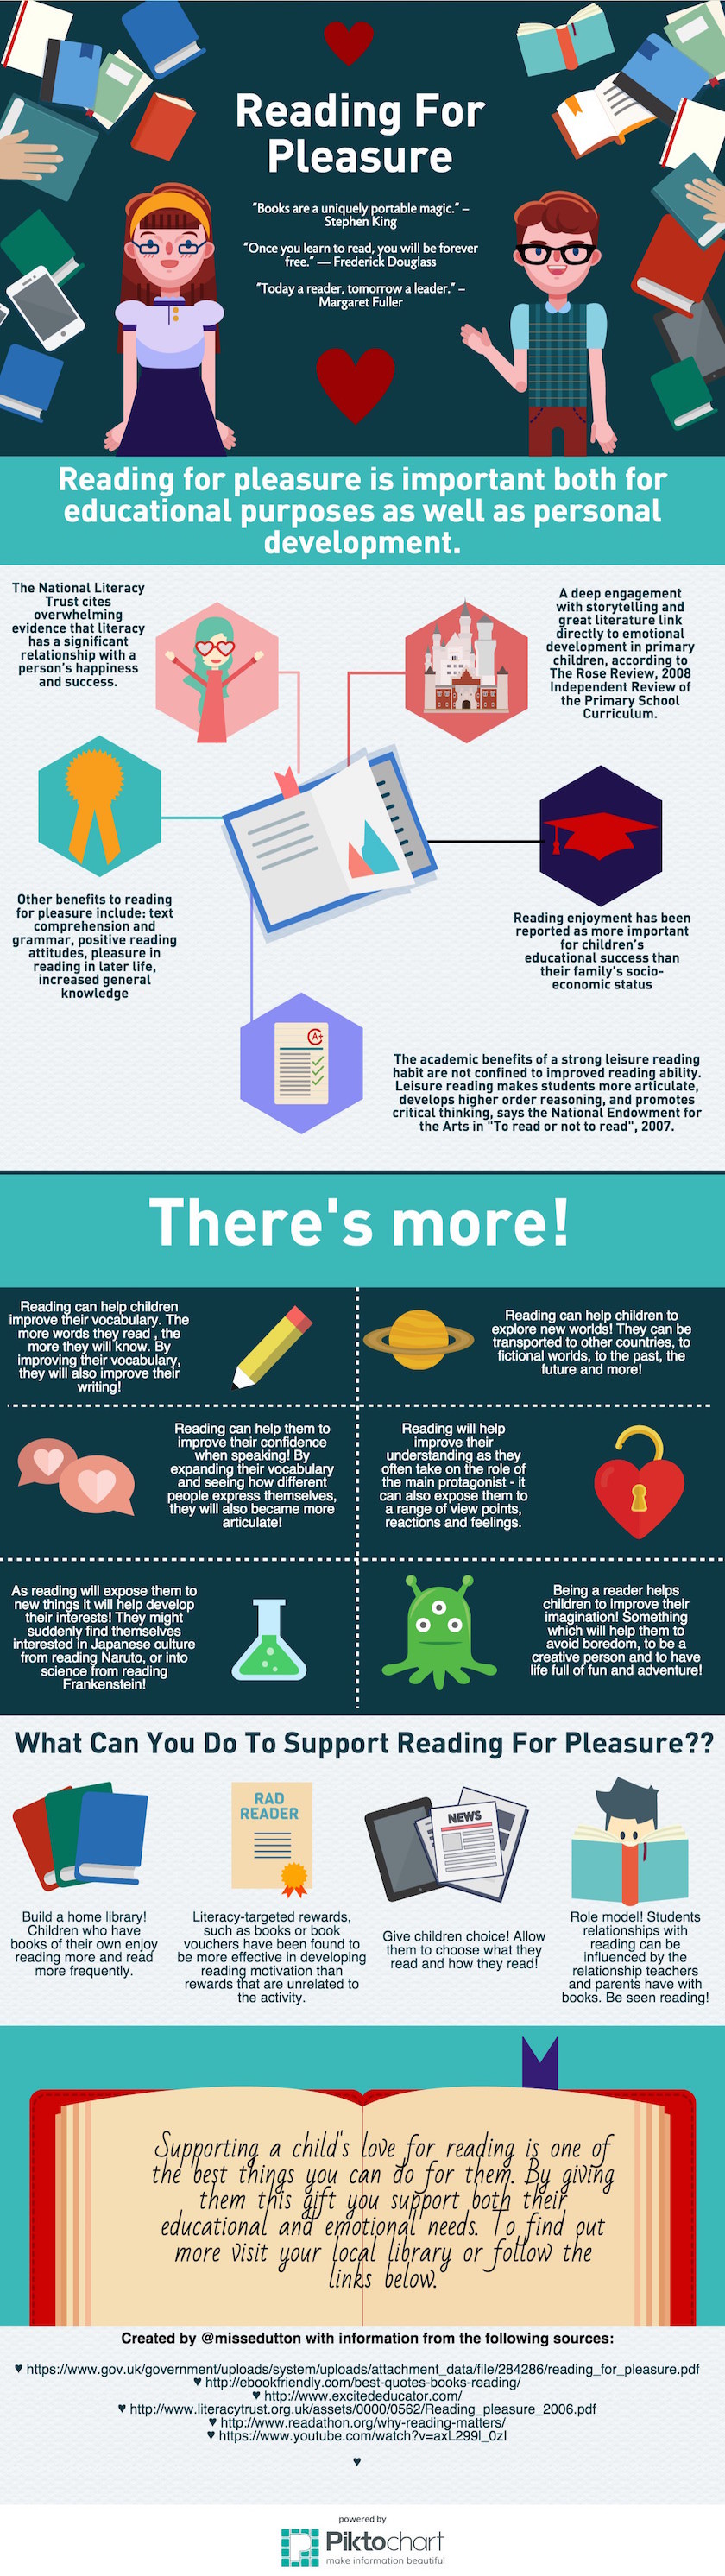 The Benefits of Reading for Pleasure (Infographic)